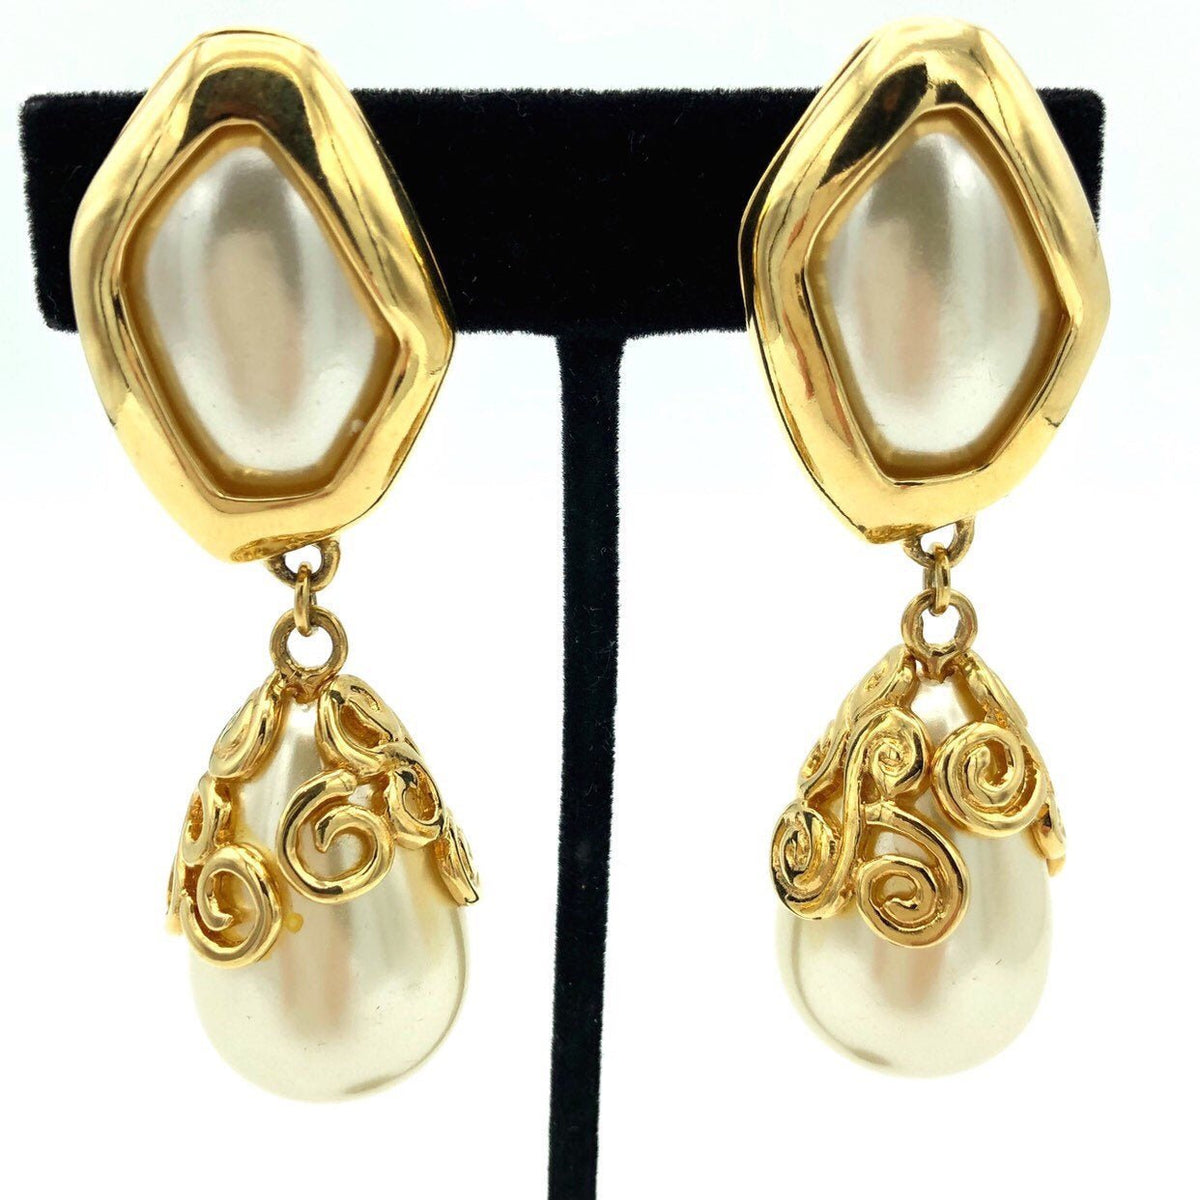 Kenneth Jay Lane Statement Pearl Dangle Vintage Clip-On Earrings - 24 Wishes Vintage Jewelry